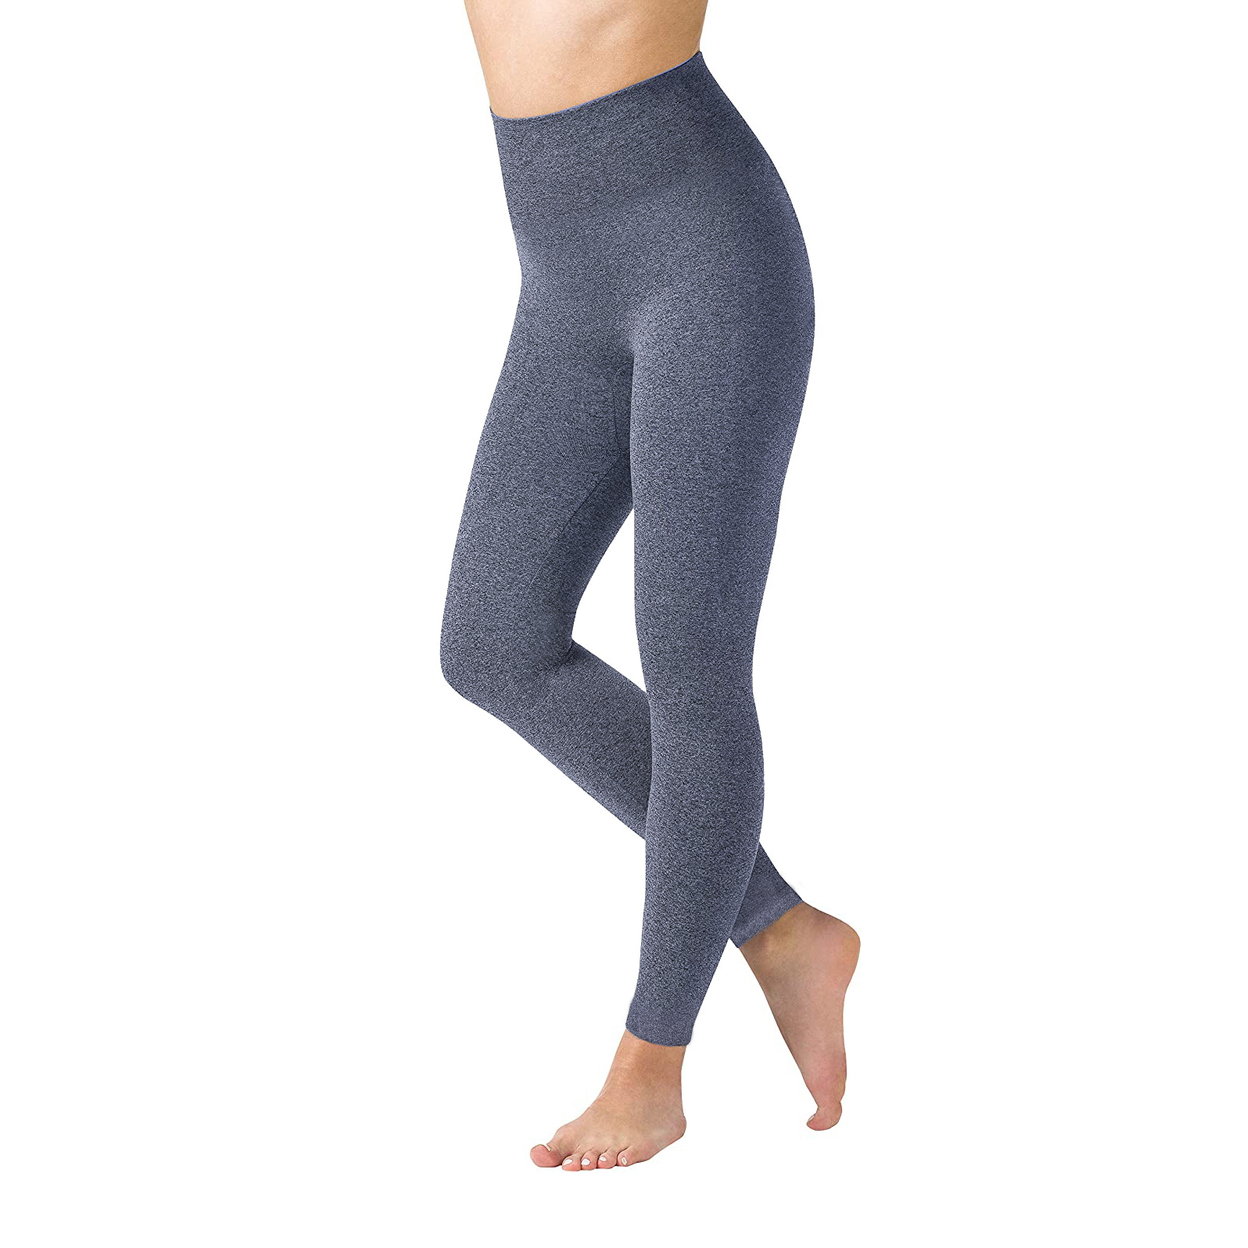 Multi-Pack: Women's High Waisted Ultra-Soft Fleece Lined Warm Marled Leggings(Available In Plus Sizes) - 2-pack, Assorted, X-large